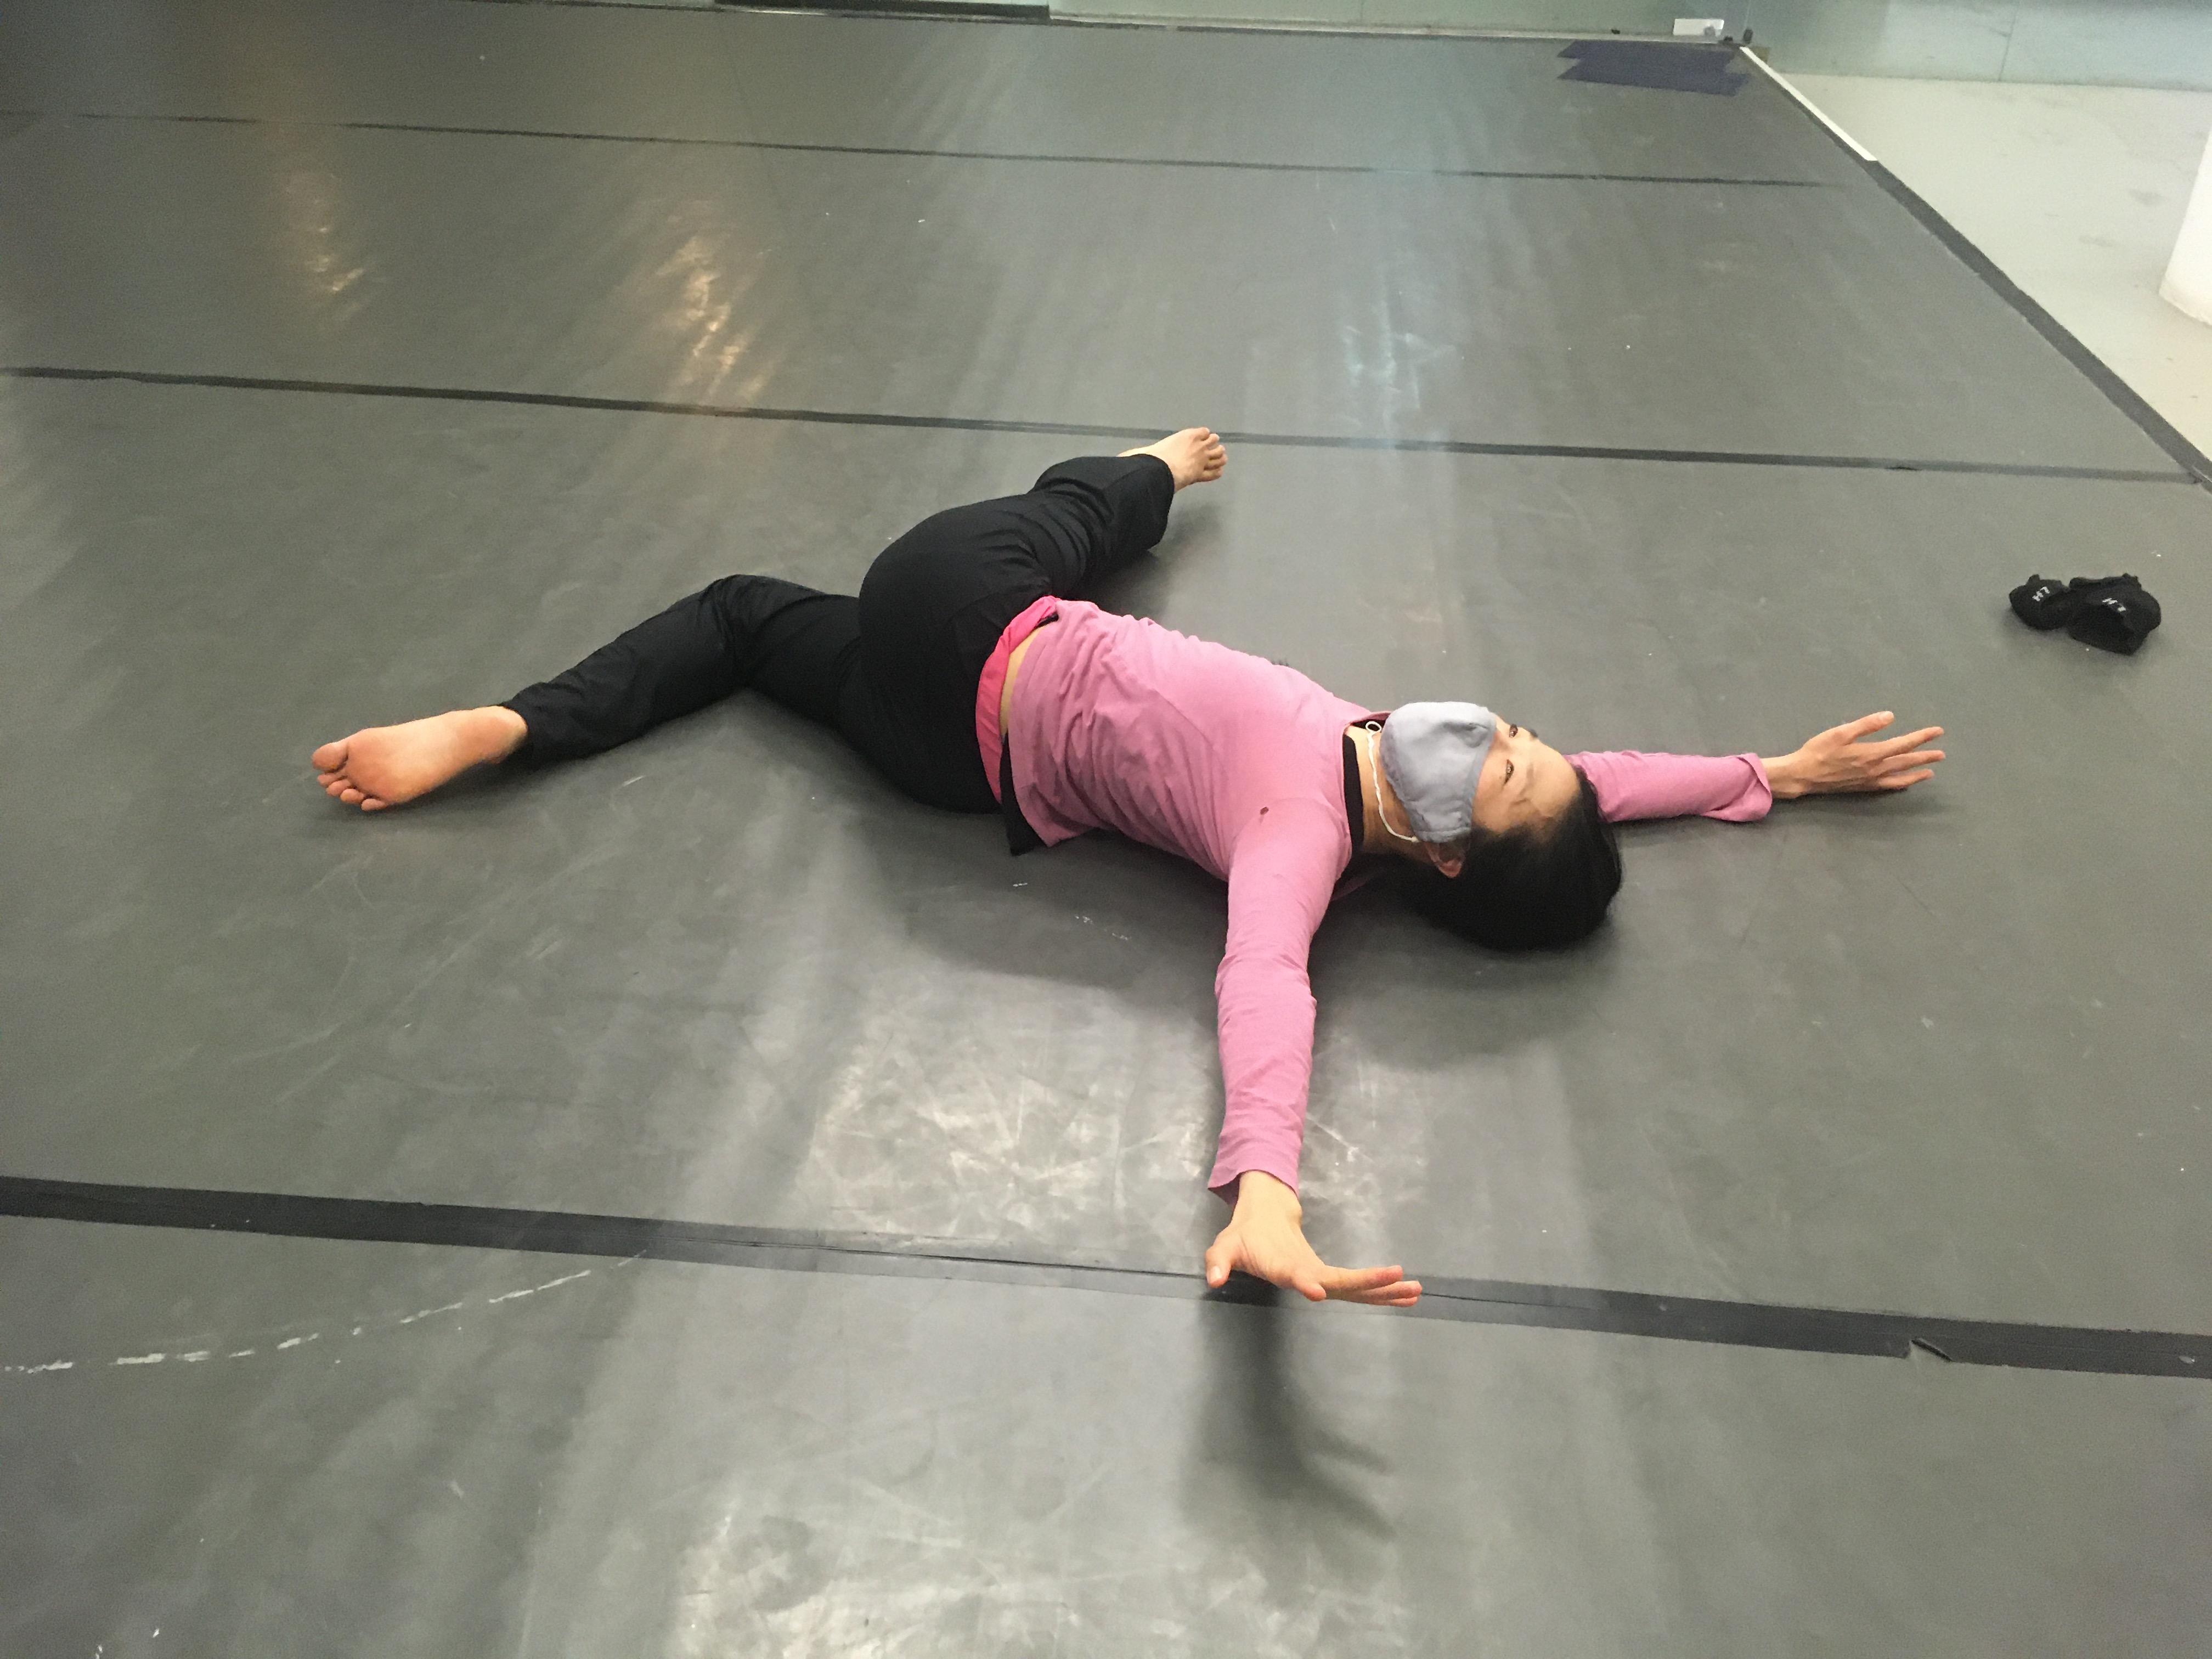  Irene Hsiao working on sensing tensegrity through her body and beyond 